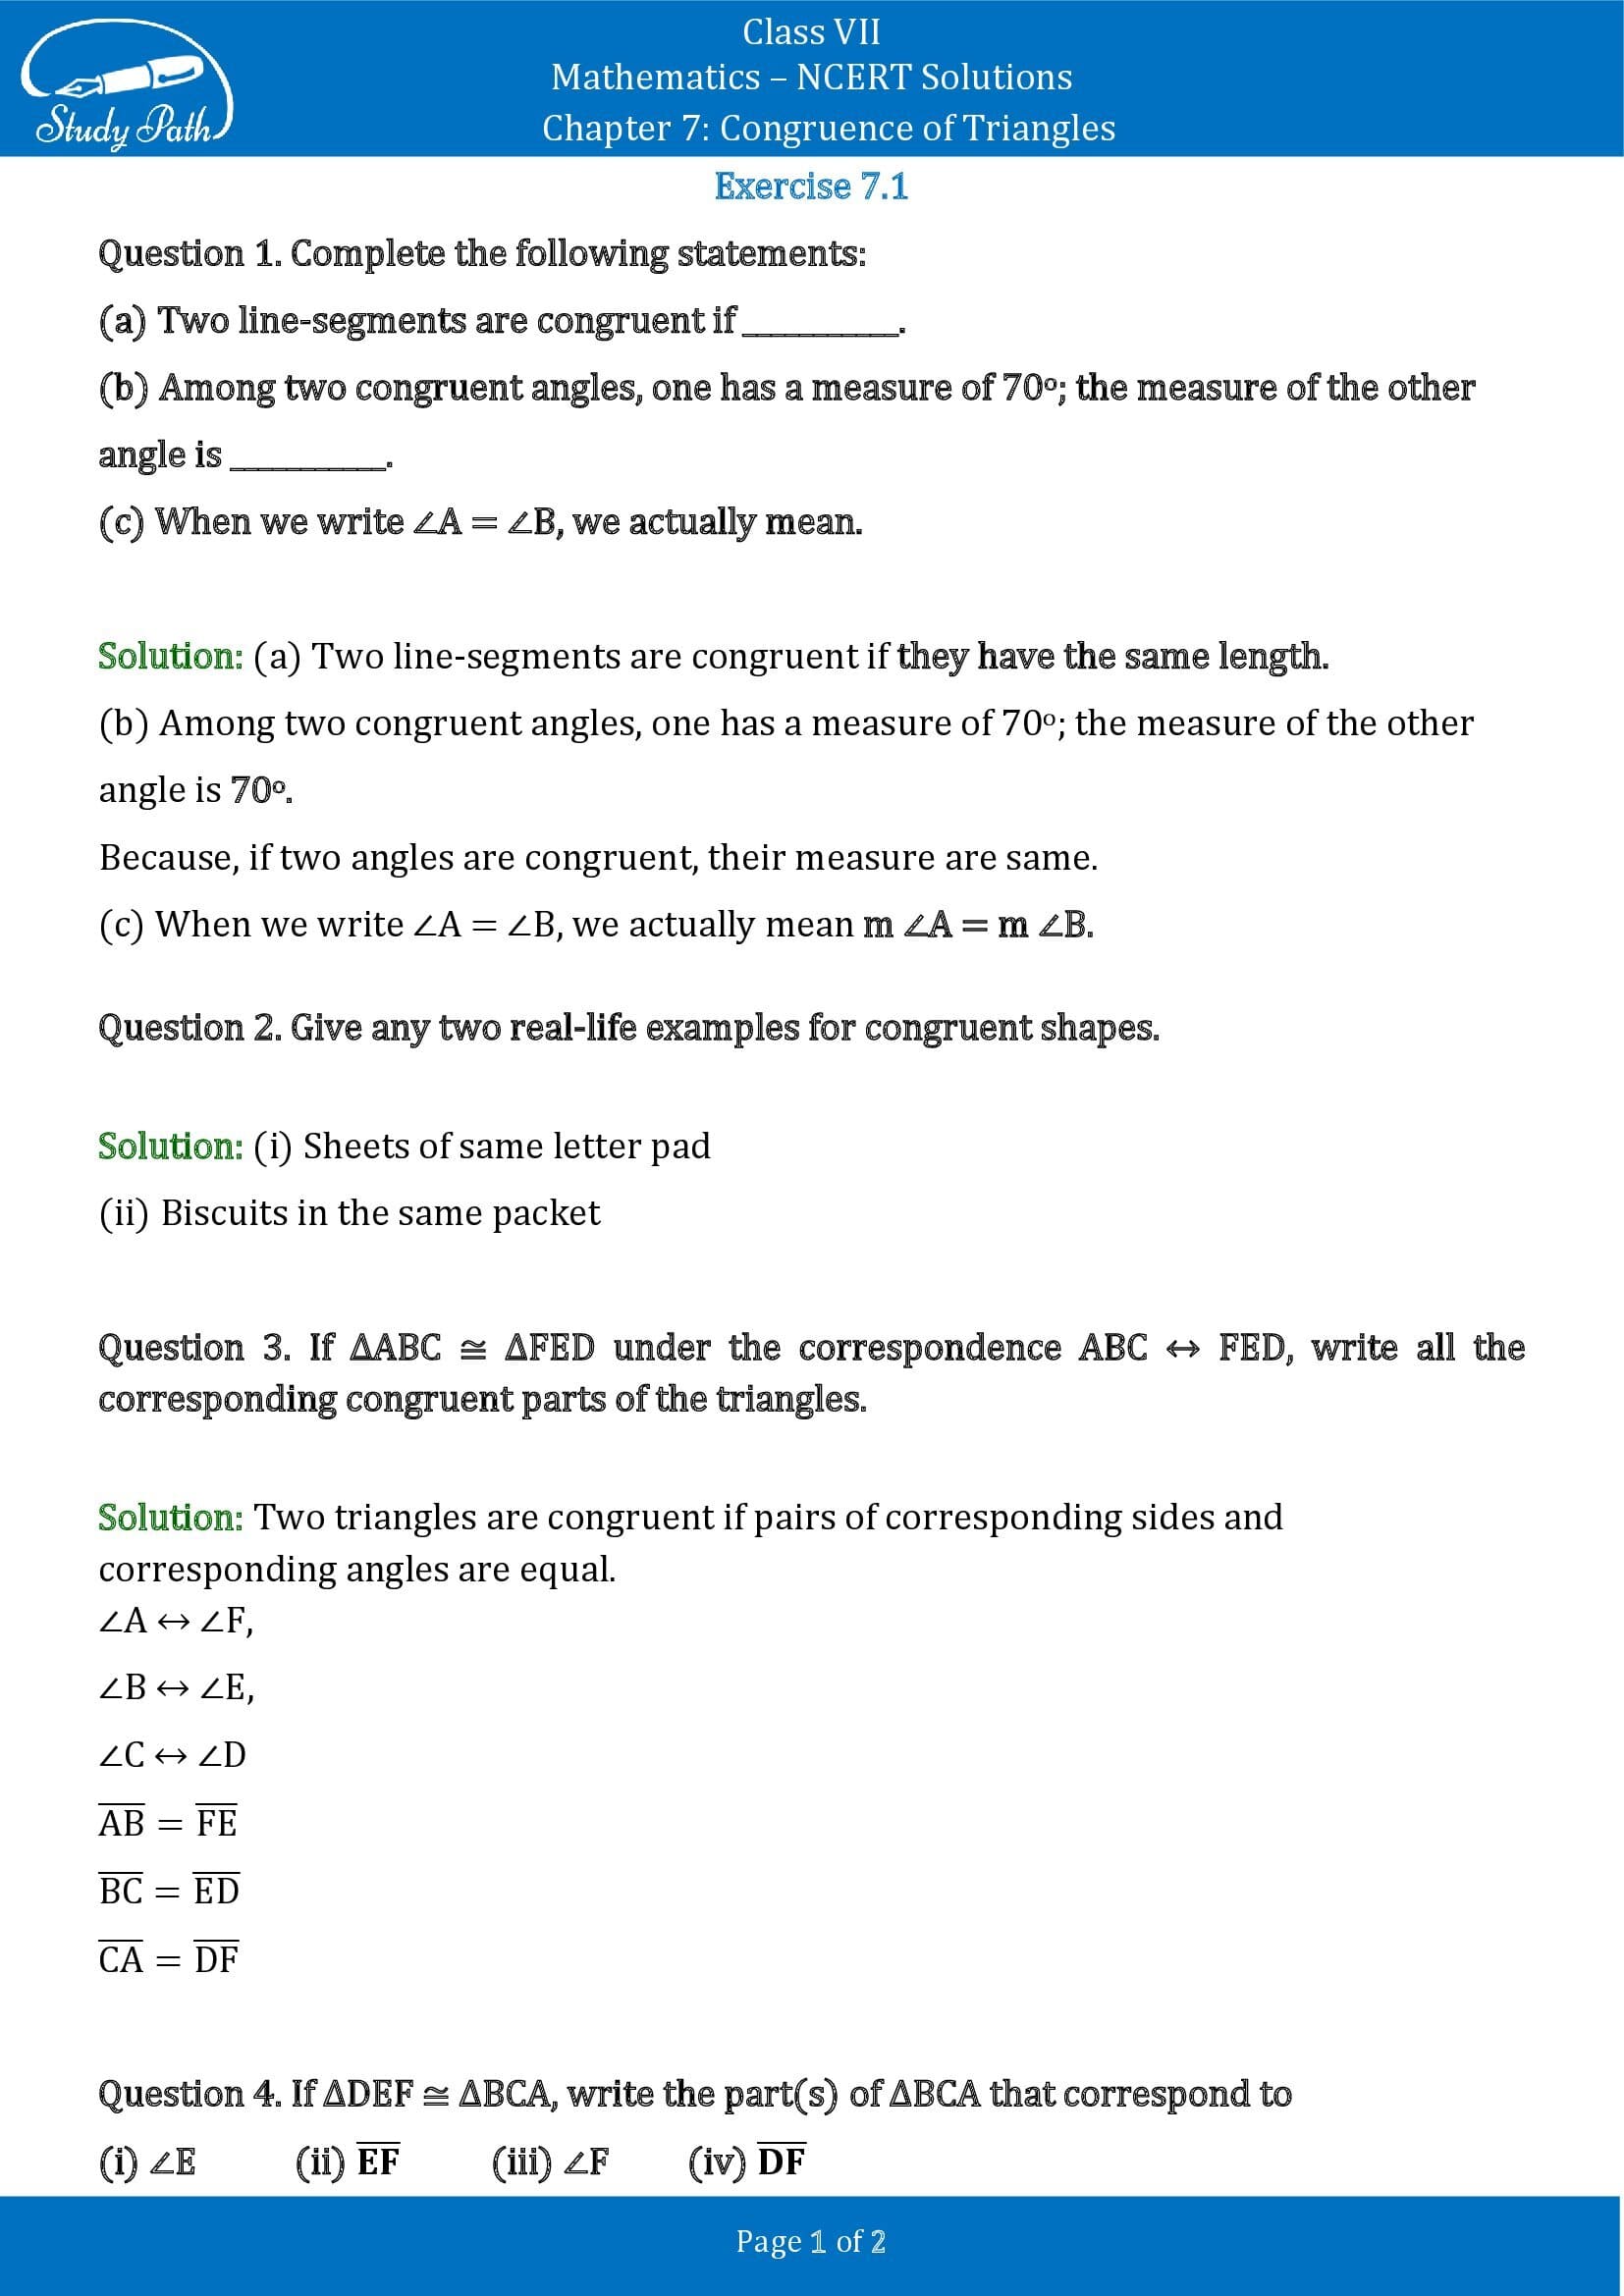 NCERT Solutions for Class 7 Maths Chapter 7 Congruence of Triangles Exercise 7.1 00001